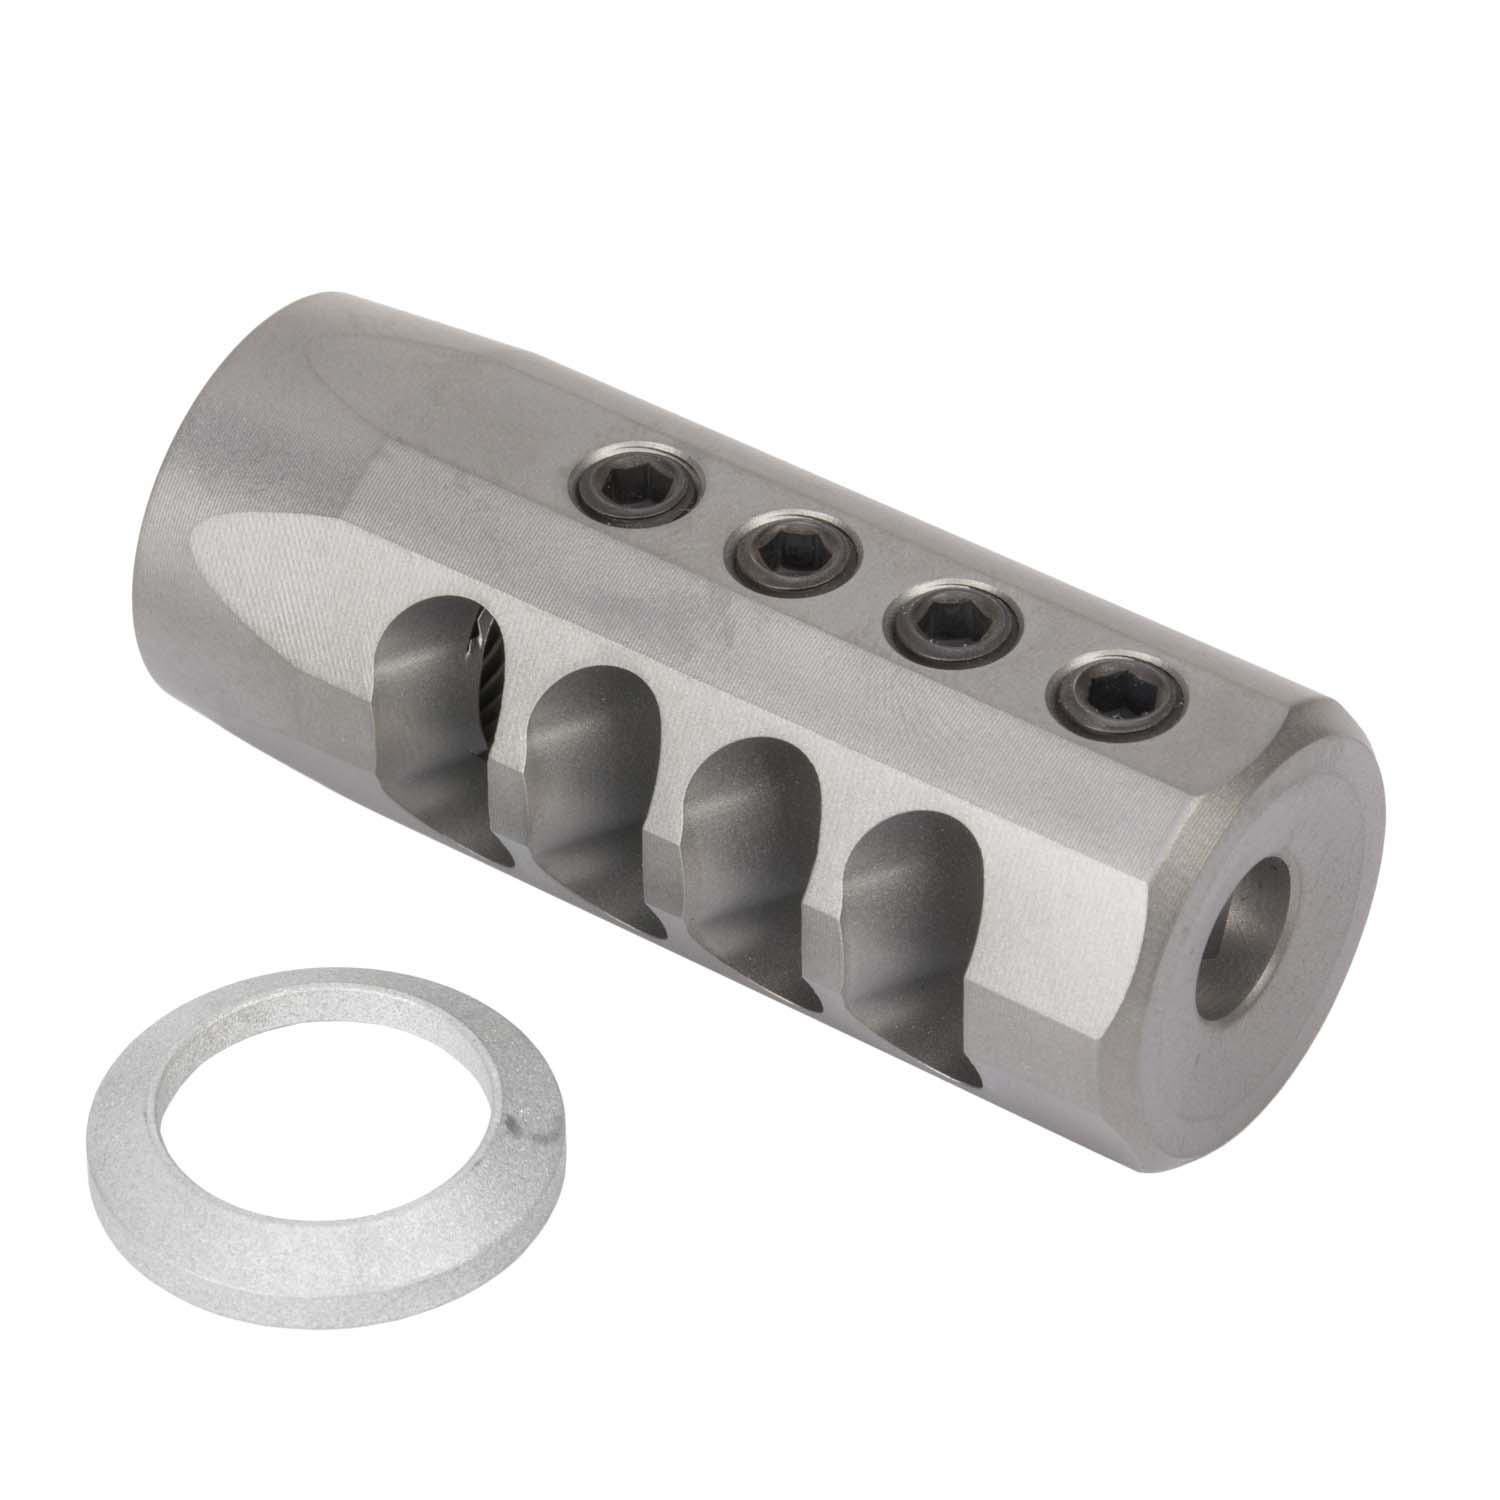 Stainless Steel 308 Muzzle brake 5/8x24 Pitch Thread .308 Crush Washer 